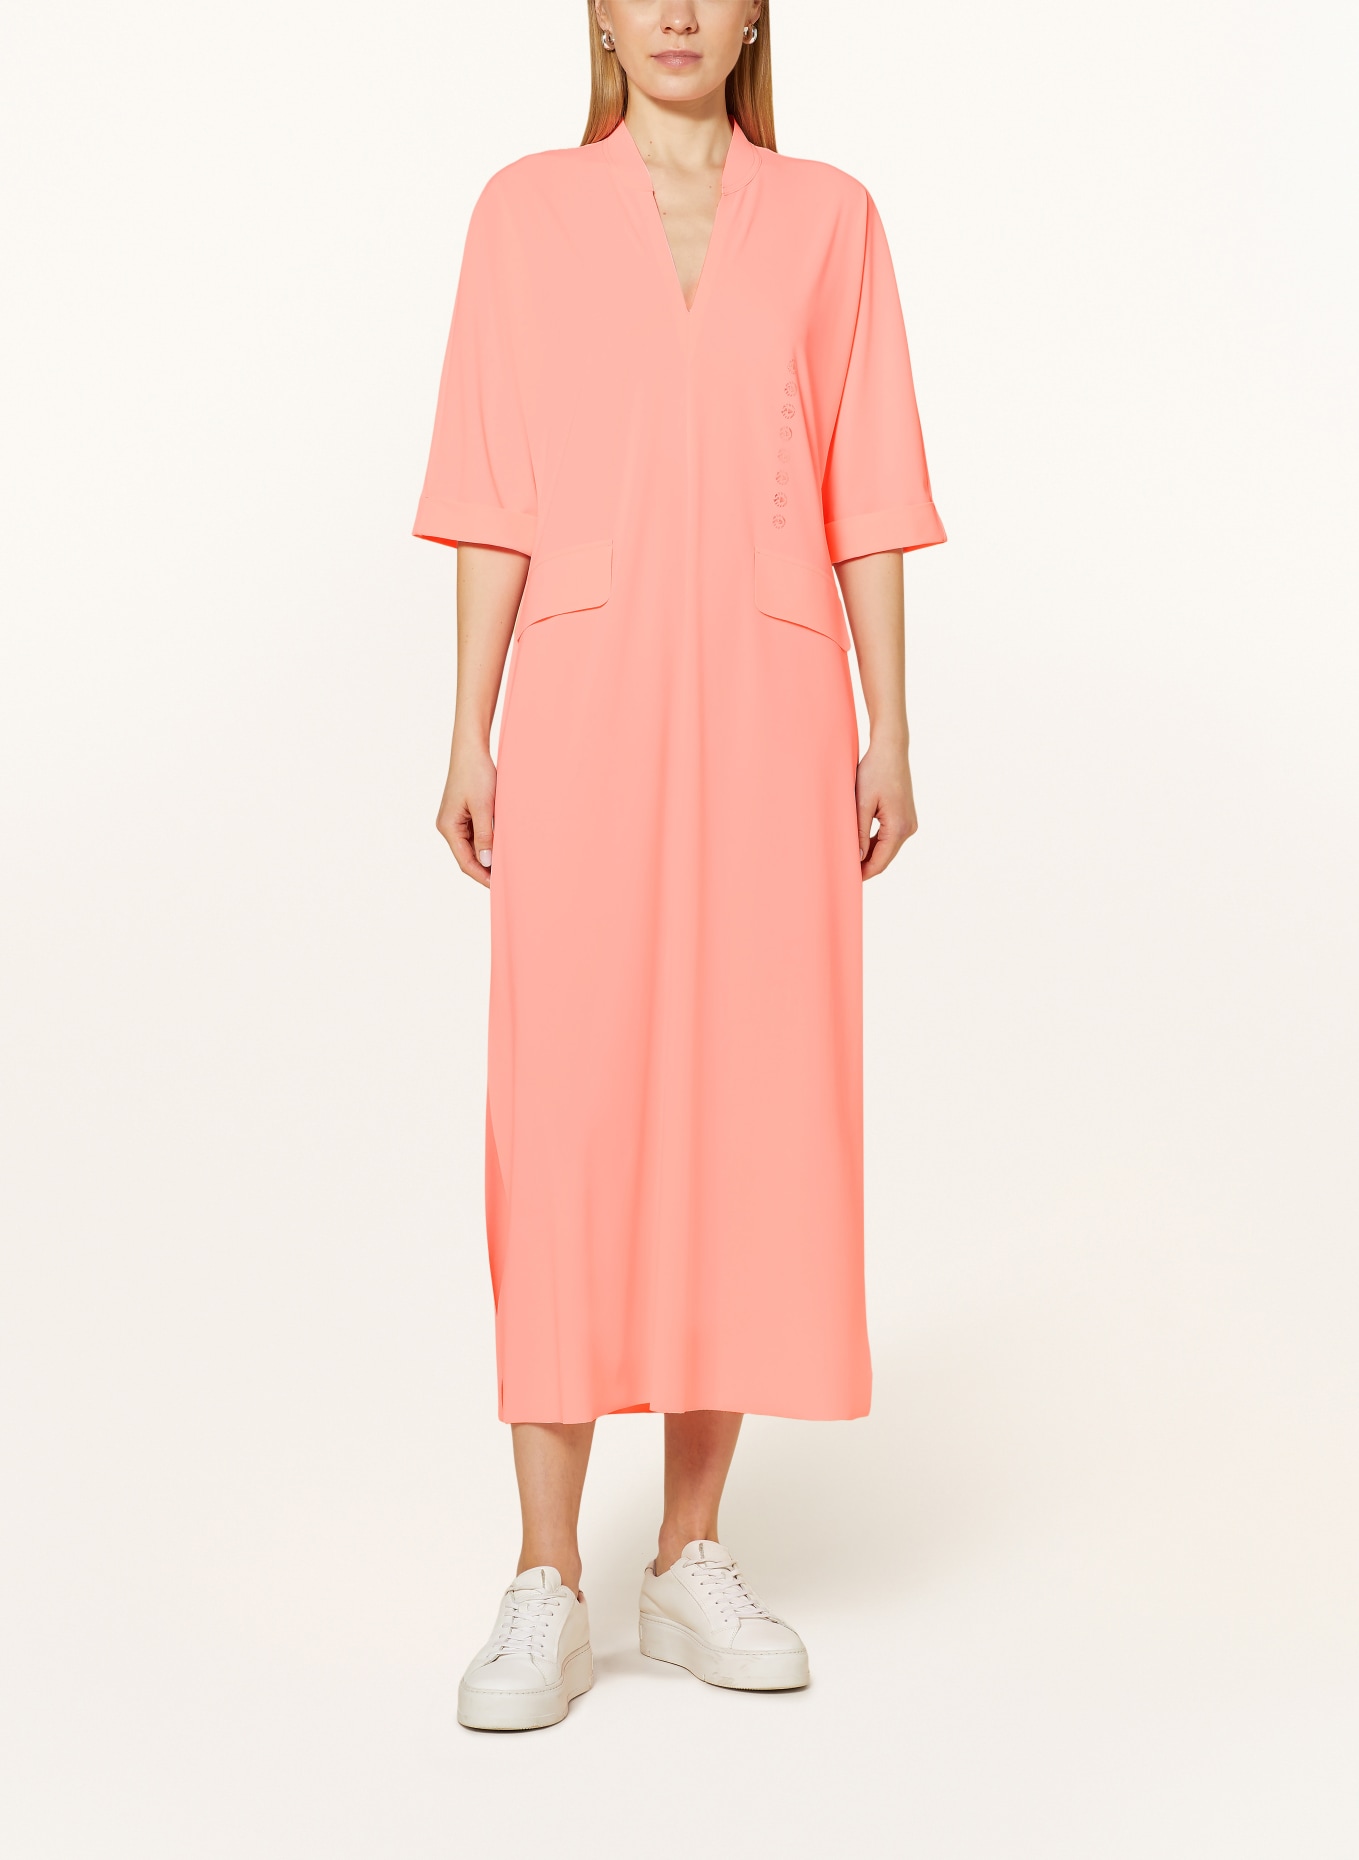 ULLI EHRLICH SPORTALM Dress with 3/4 sleeves, Color: NEON PINK (Image 2)